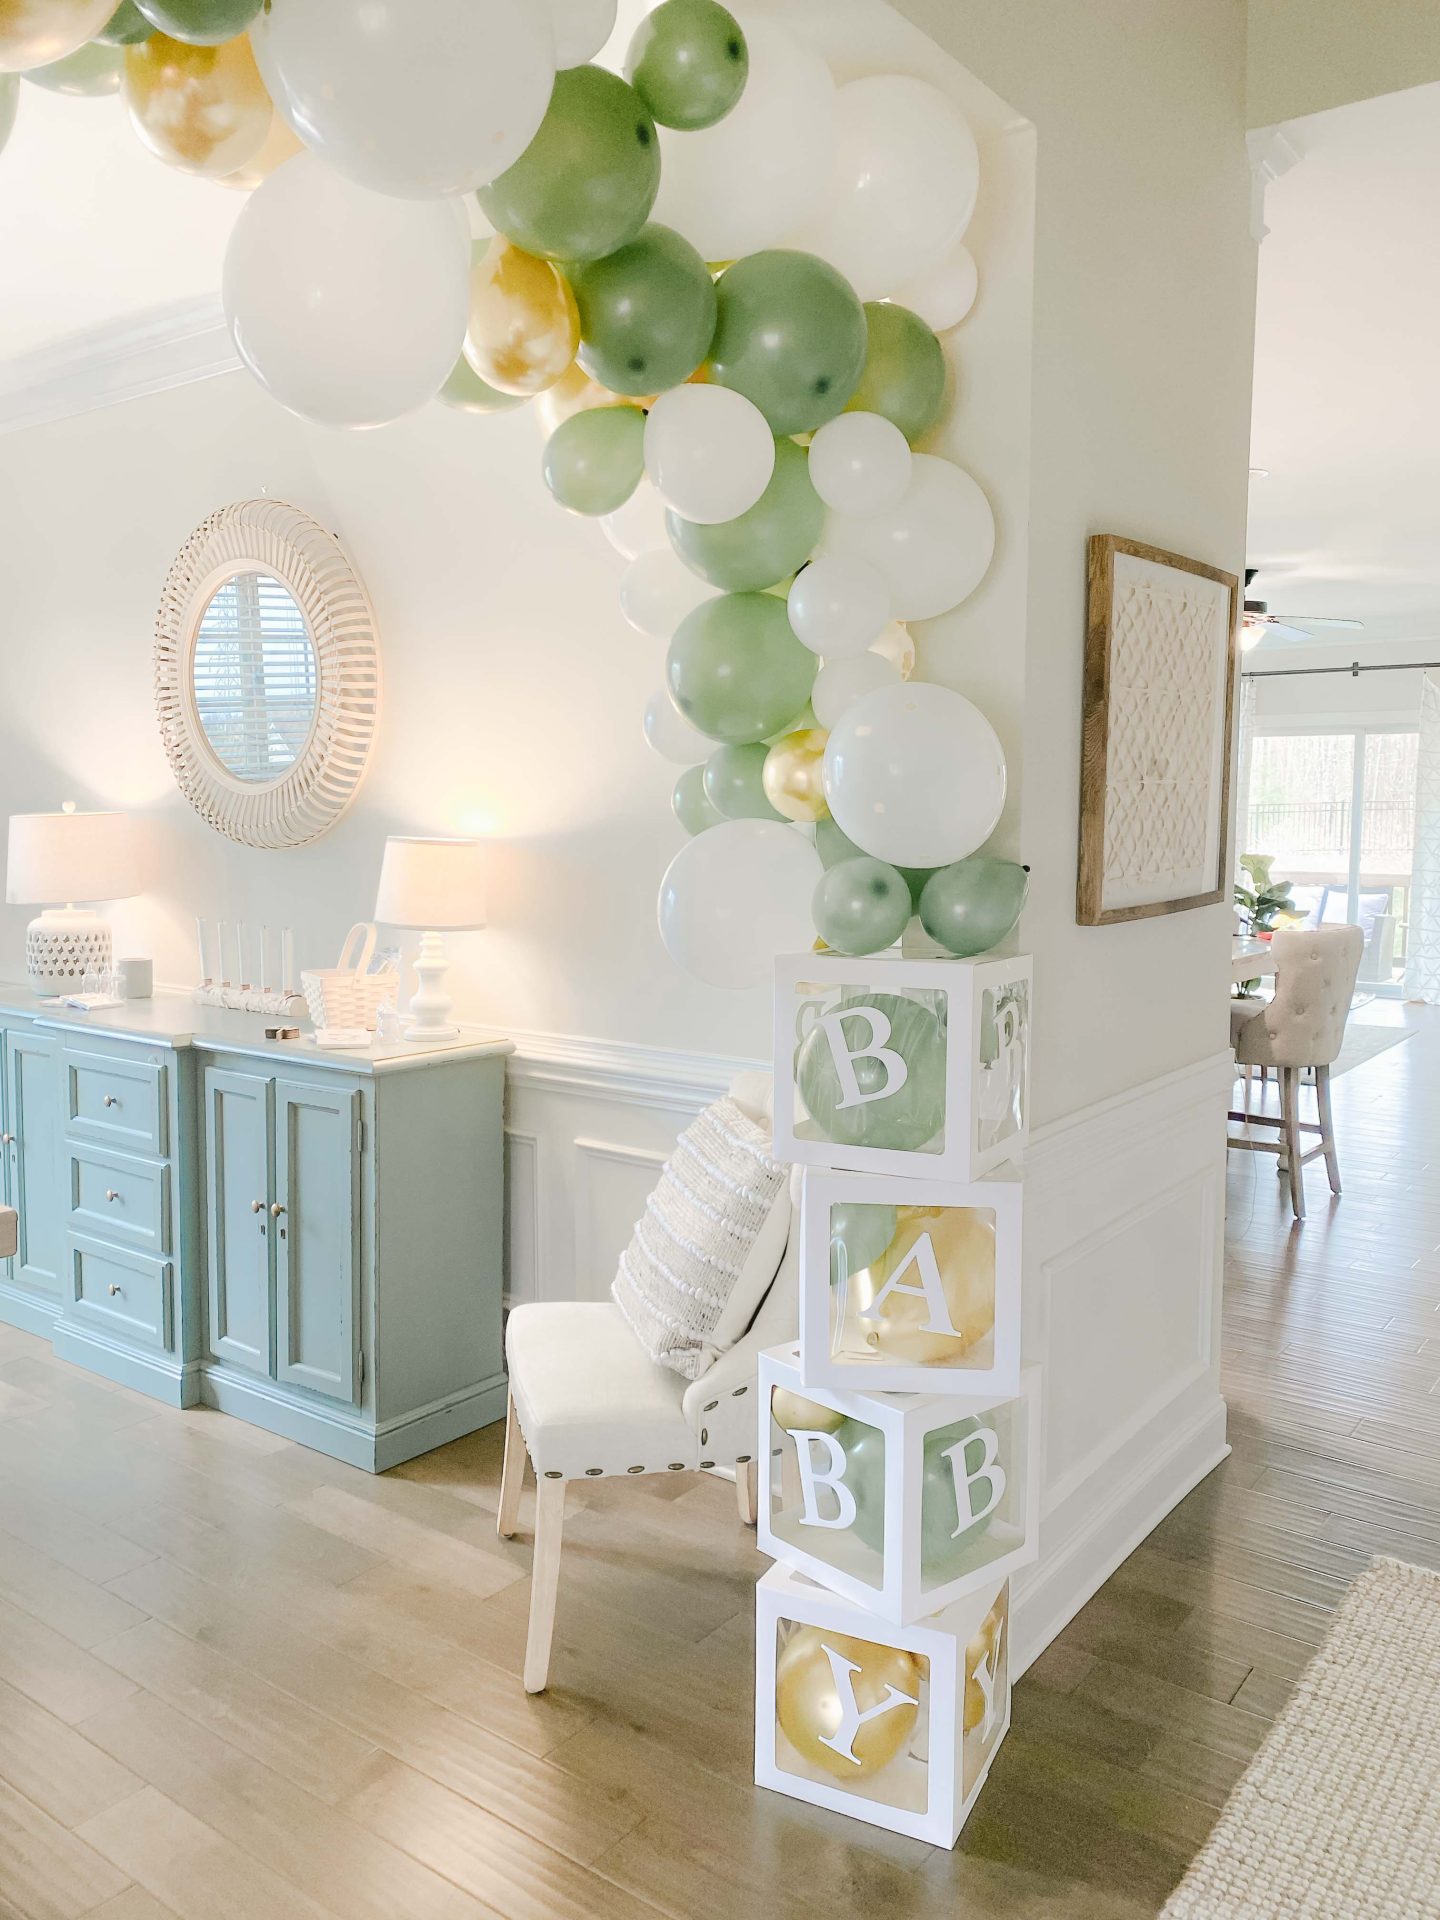 Baby Shower, Team Green, Baby shower design, baby shower decor, small get together for baby, celebration, pregnancy, baby on the way, green dress, what to wear to baby shower, baby is coming, boy or girl, pregnant blog, third trimester, 31 weeks